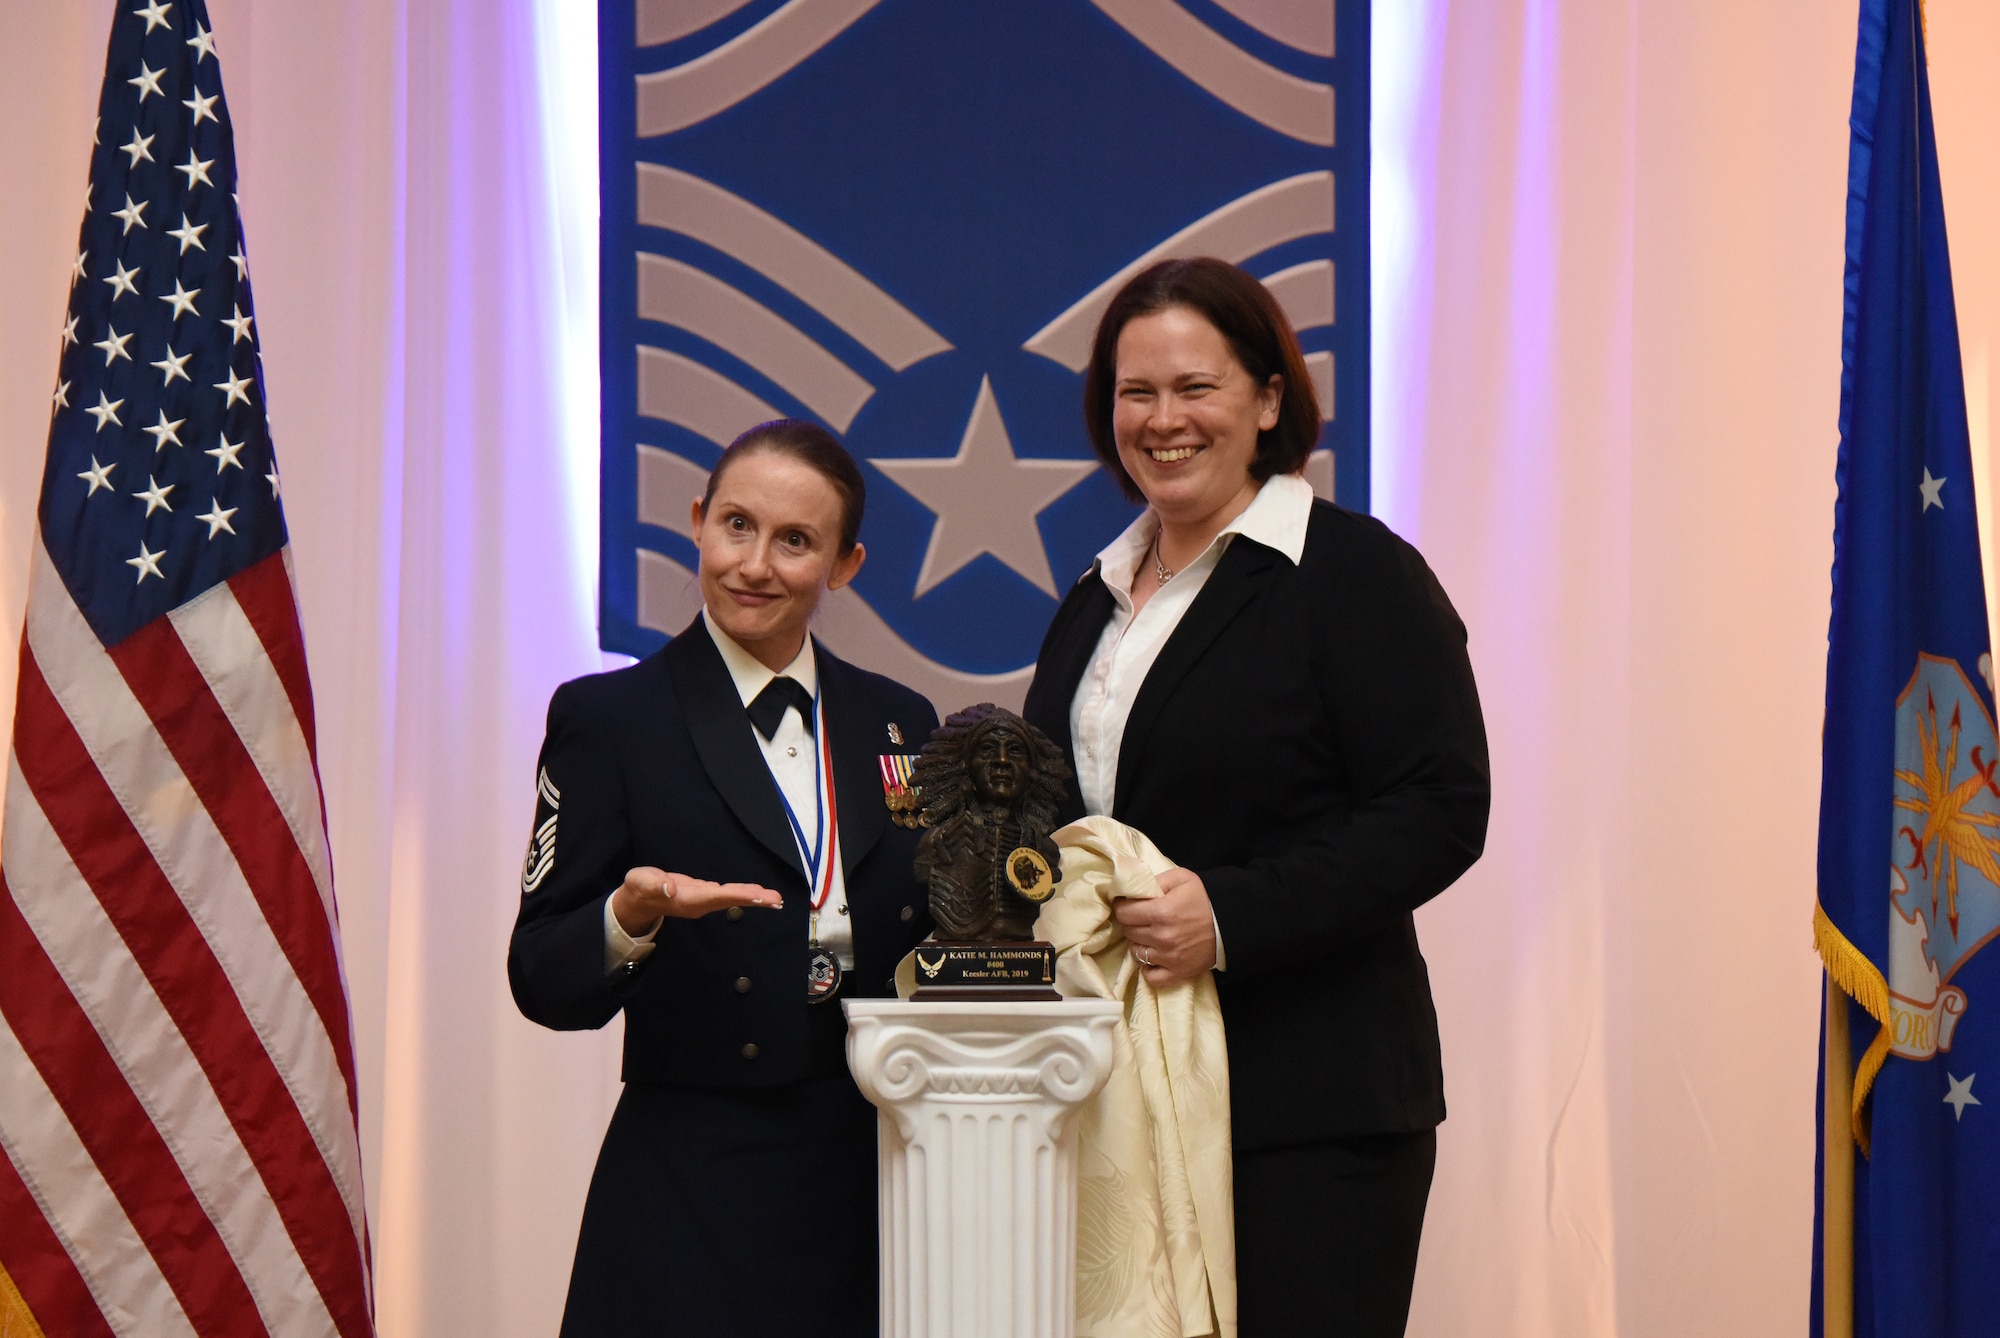 U.S. Air Force Senior Master Sgt. Katie Hammonds, 81st Medical Support Squadron medical logistics flight chief, is joined by her friend, Erin Marchand, as they unveil a statue presented to Hammonds during the Chief Induction Ceremony inside the Bay Breeze Event Center at Keesler Air Force Base, Mississippi, Feb. 15, 2019. Five Keesler Airmen earned their chief master sergeant stripe during the 2019 promotion release. Air Force officials selected 479 senior master sergeants for promotion to chief master sergeant out of 2,241 eligible for a selection rate of 21.37 percent. Chief master sergeants make up one percent of the Air Force enlisted force. (U.S. Air Force photo by Kemberly Groue)